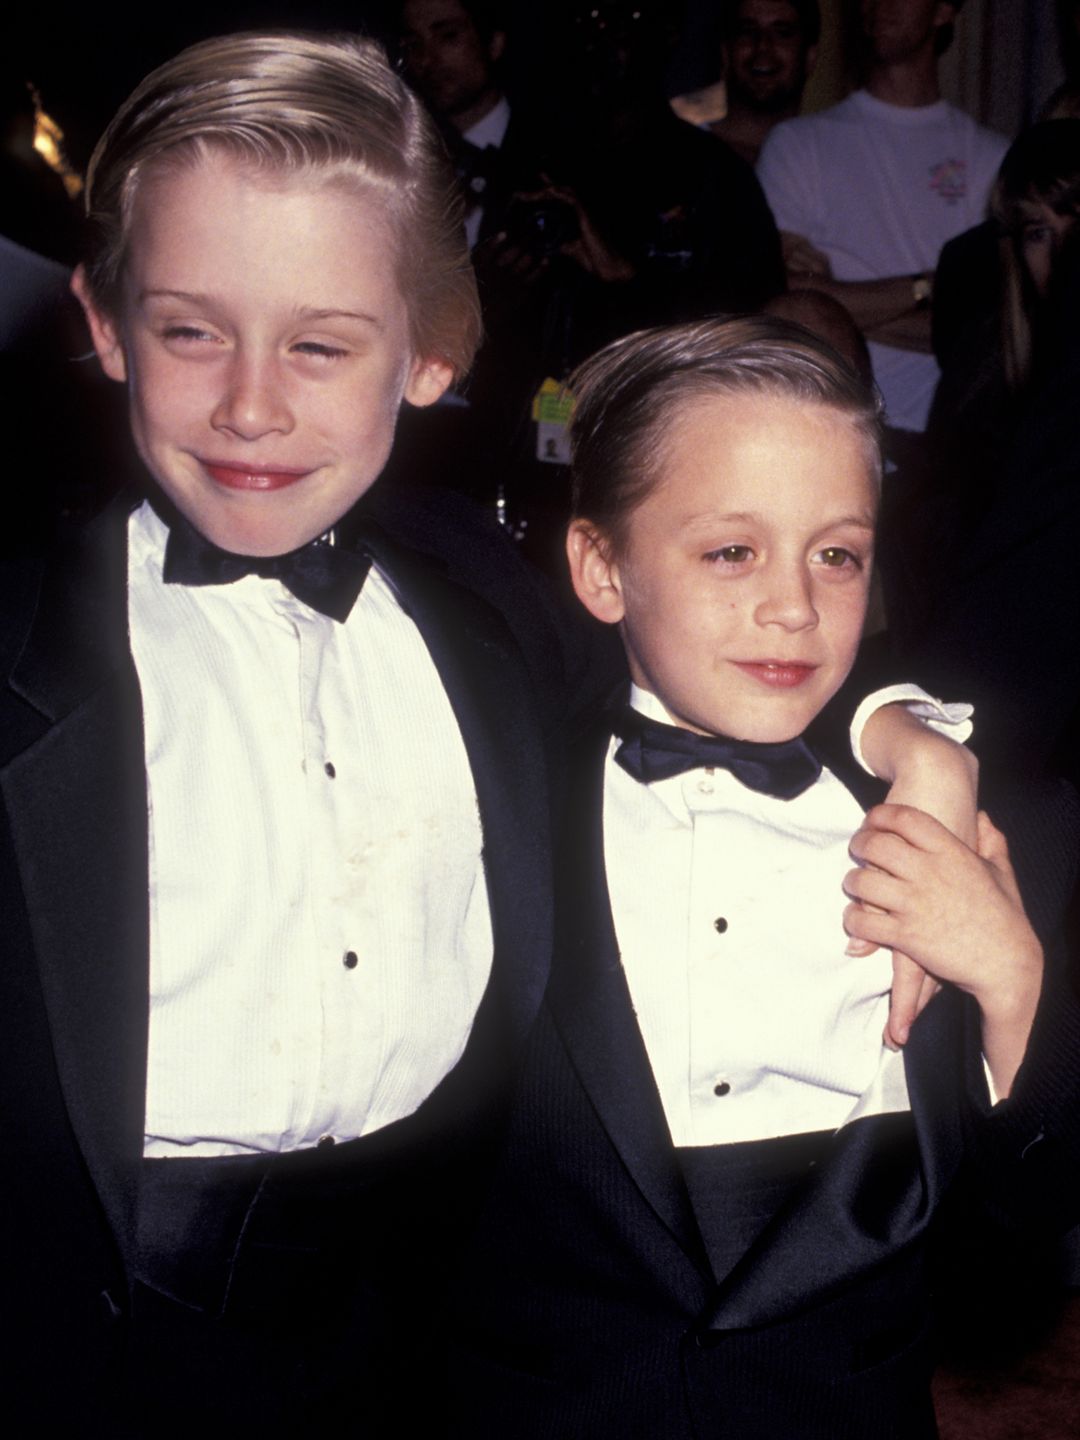 A young Macaulay and Kieran in tuxedos on a red carpet